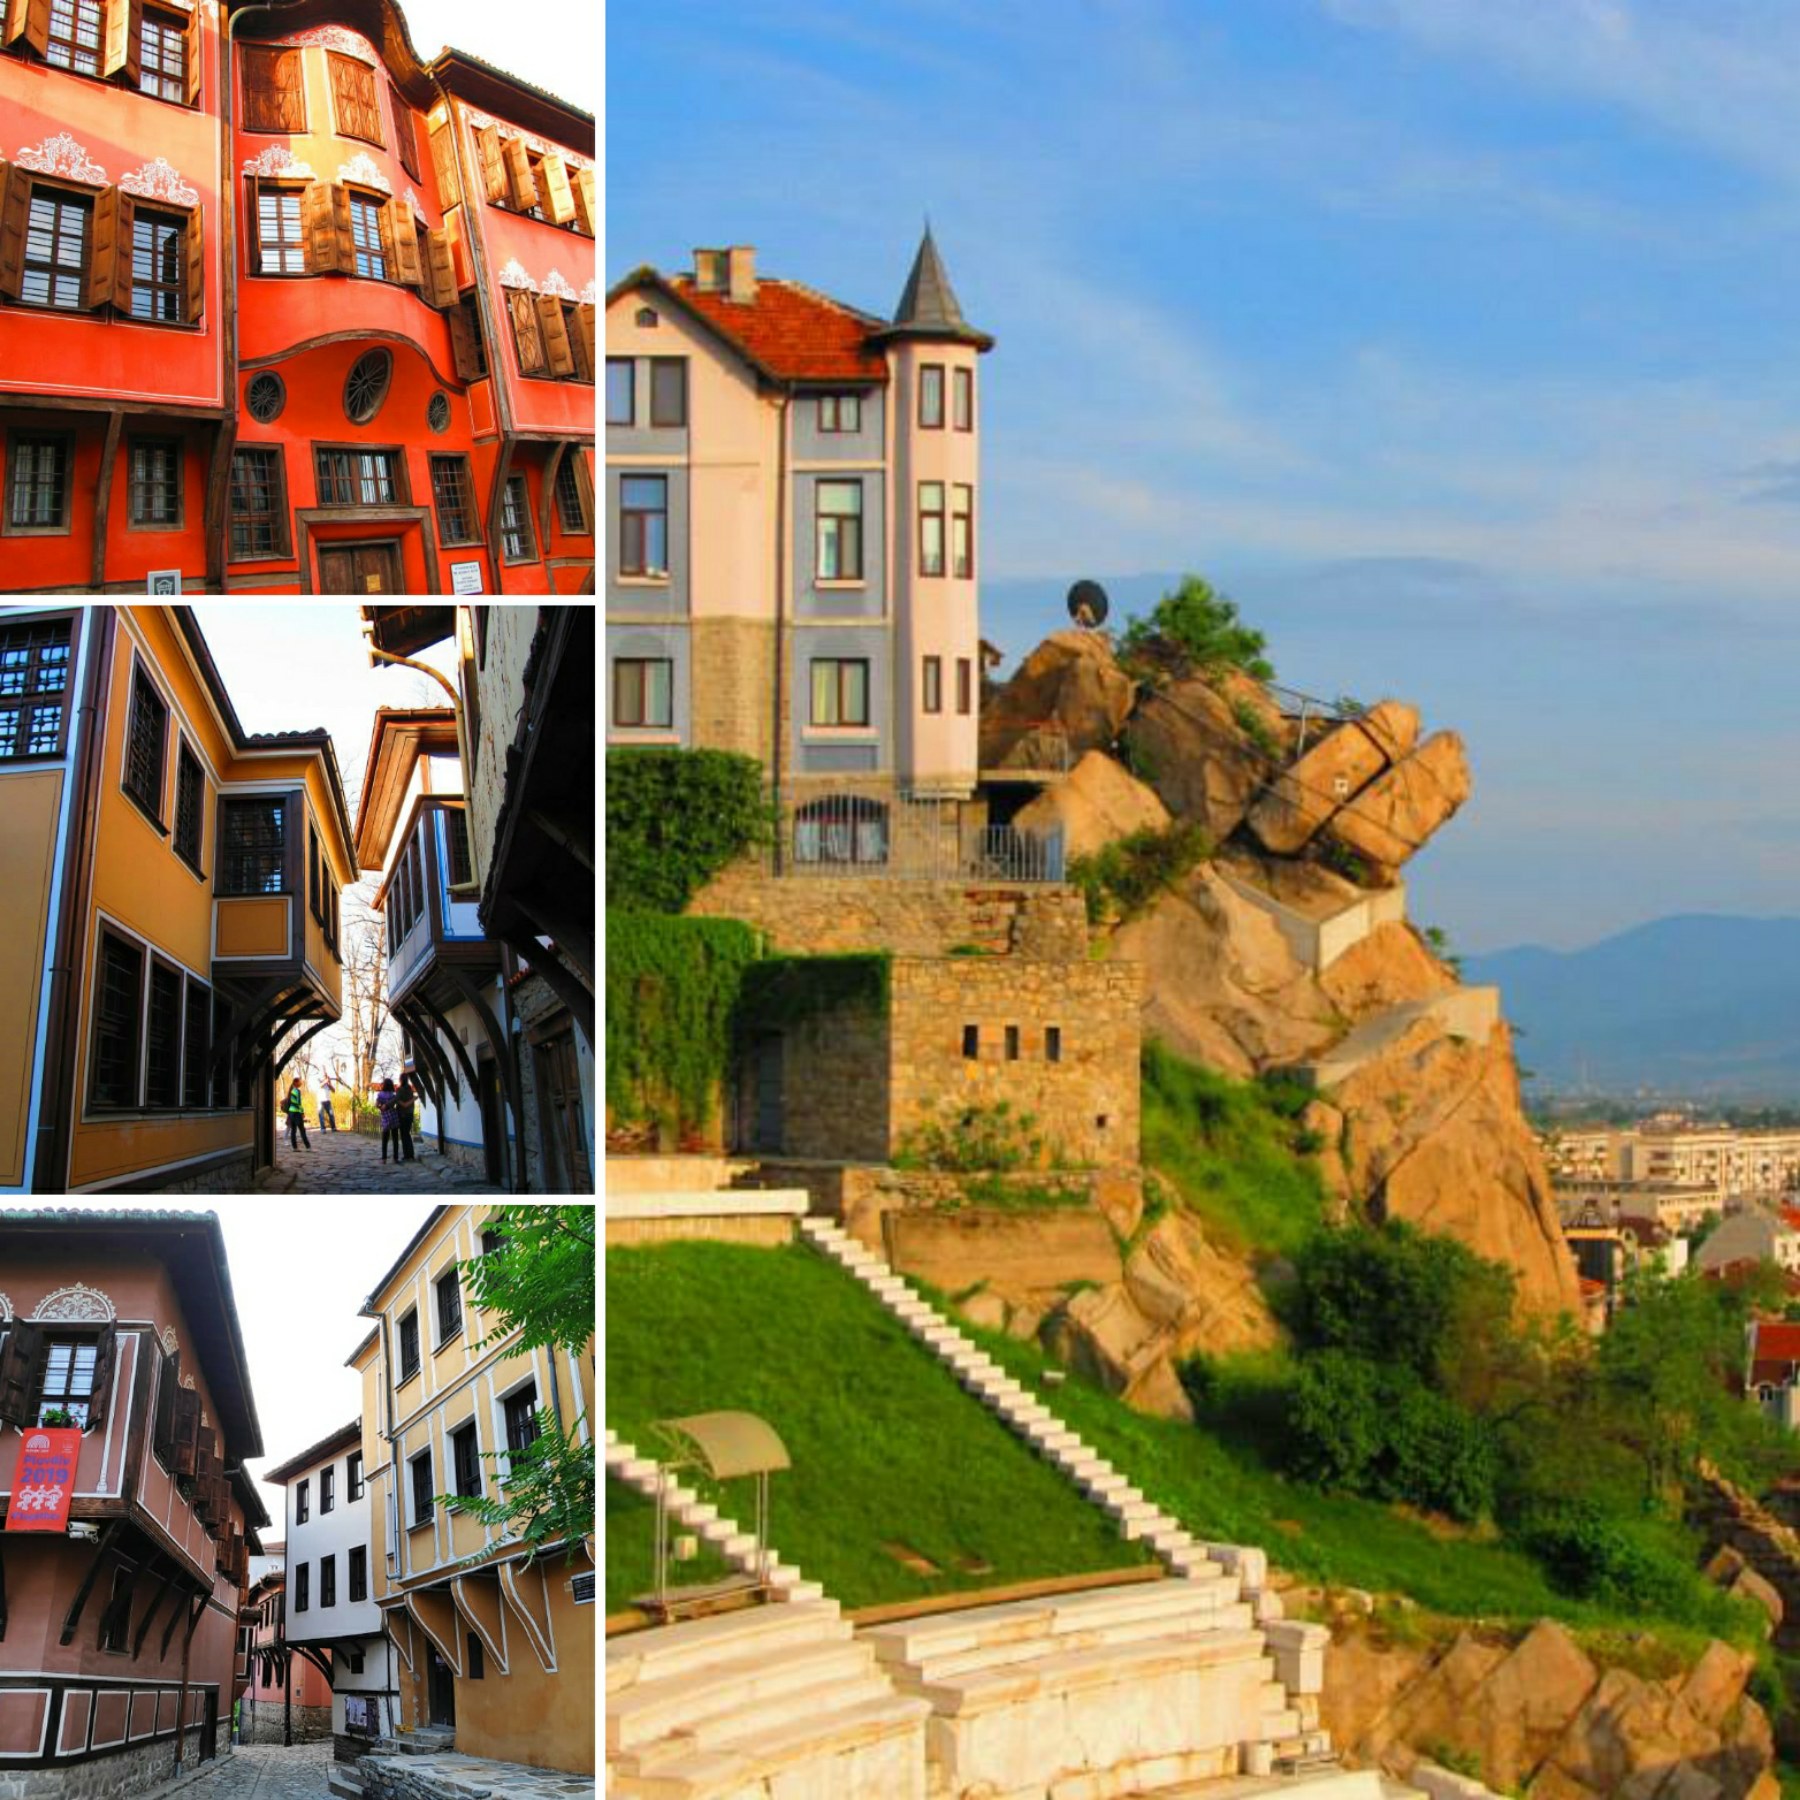 Plovdiv Is one of the oldest cities in Europe